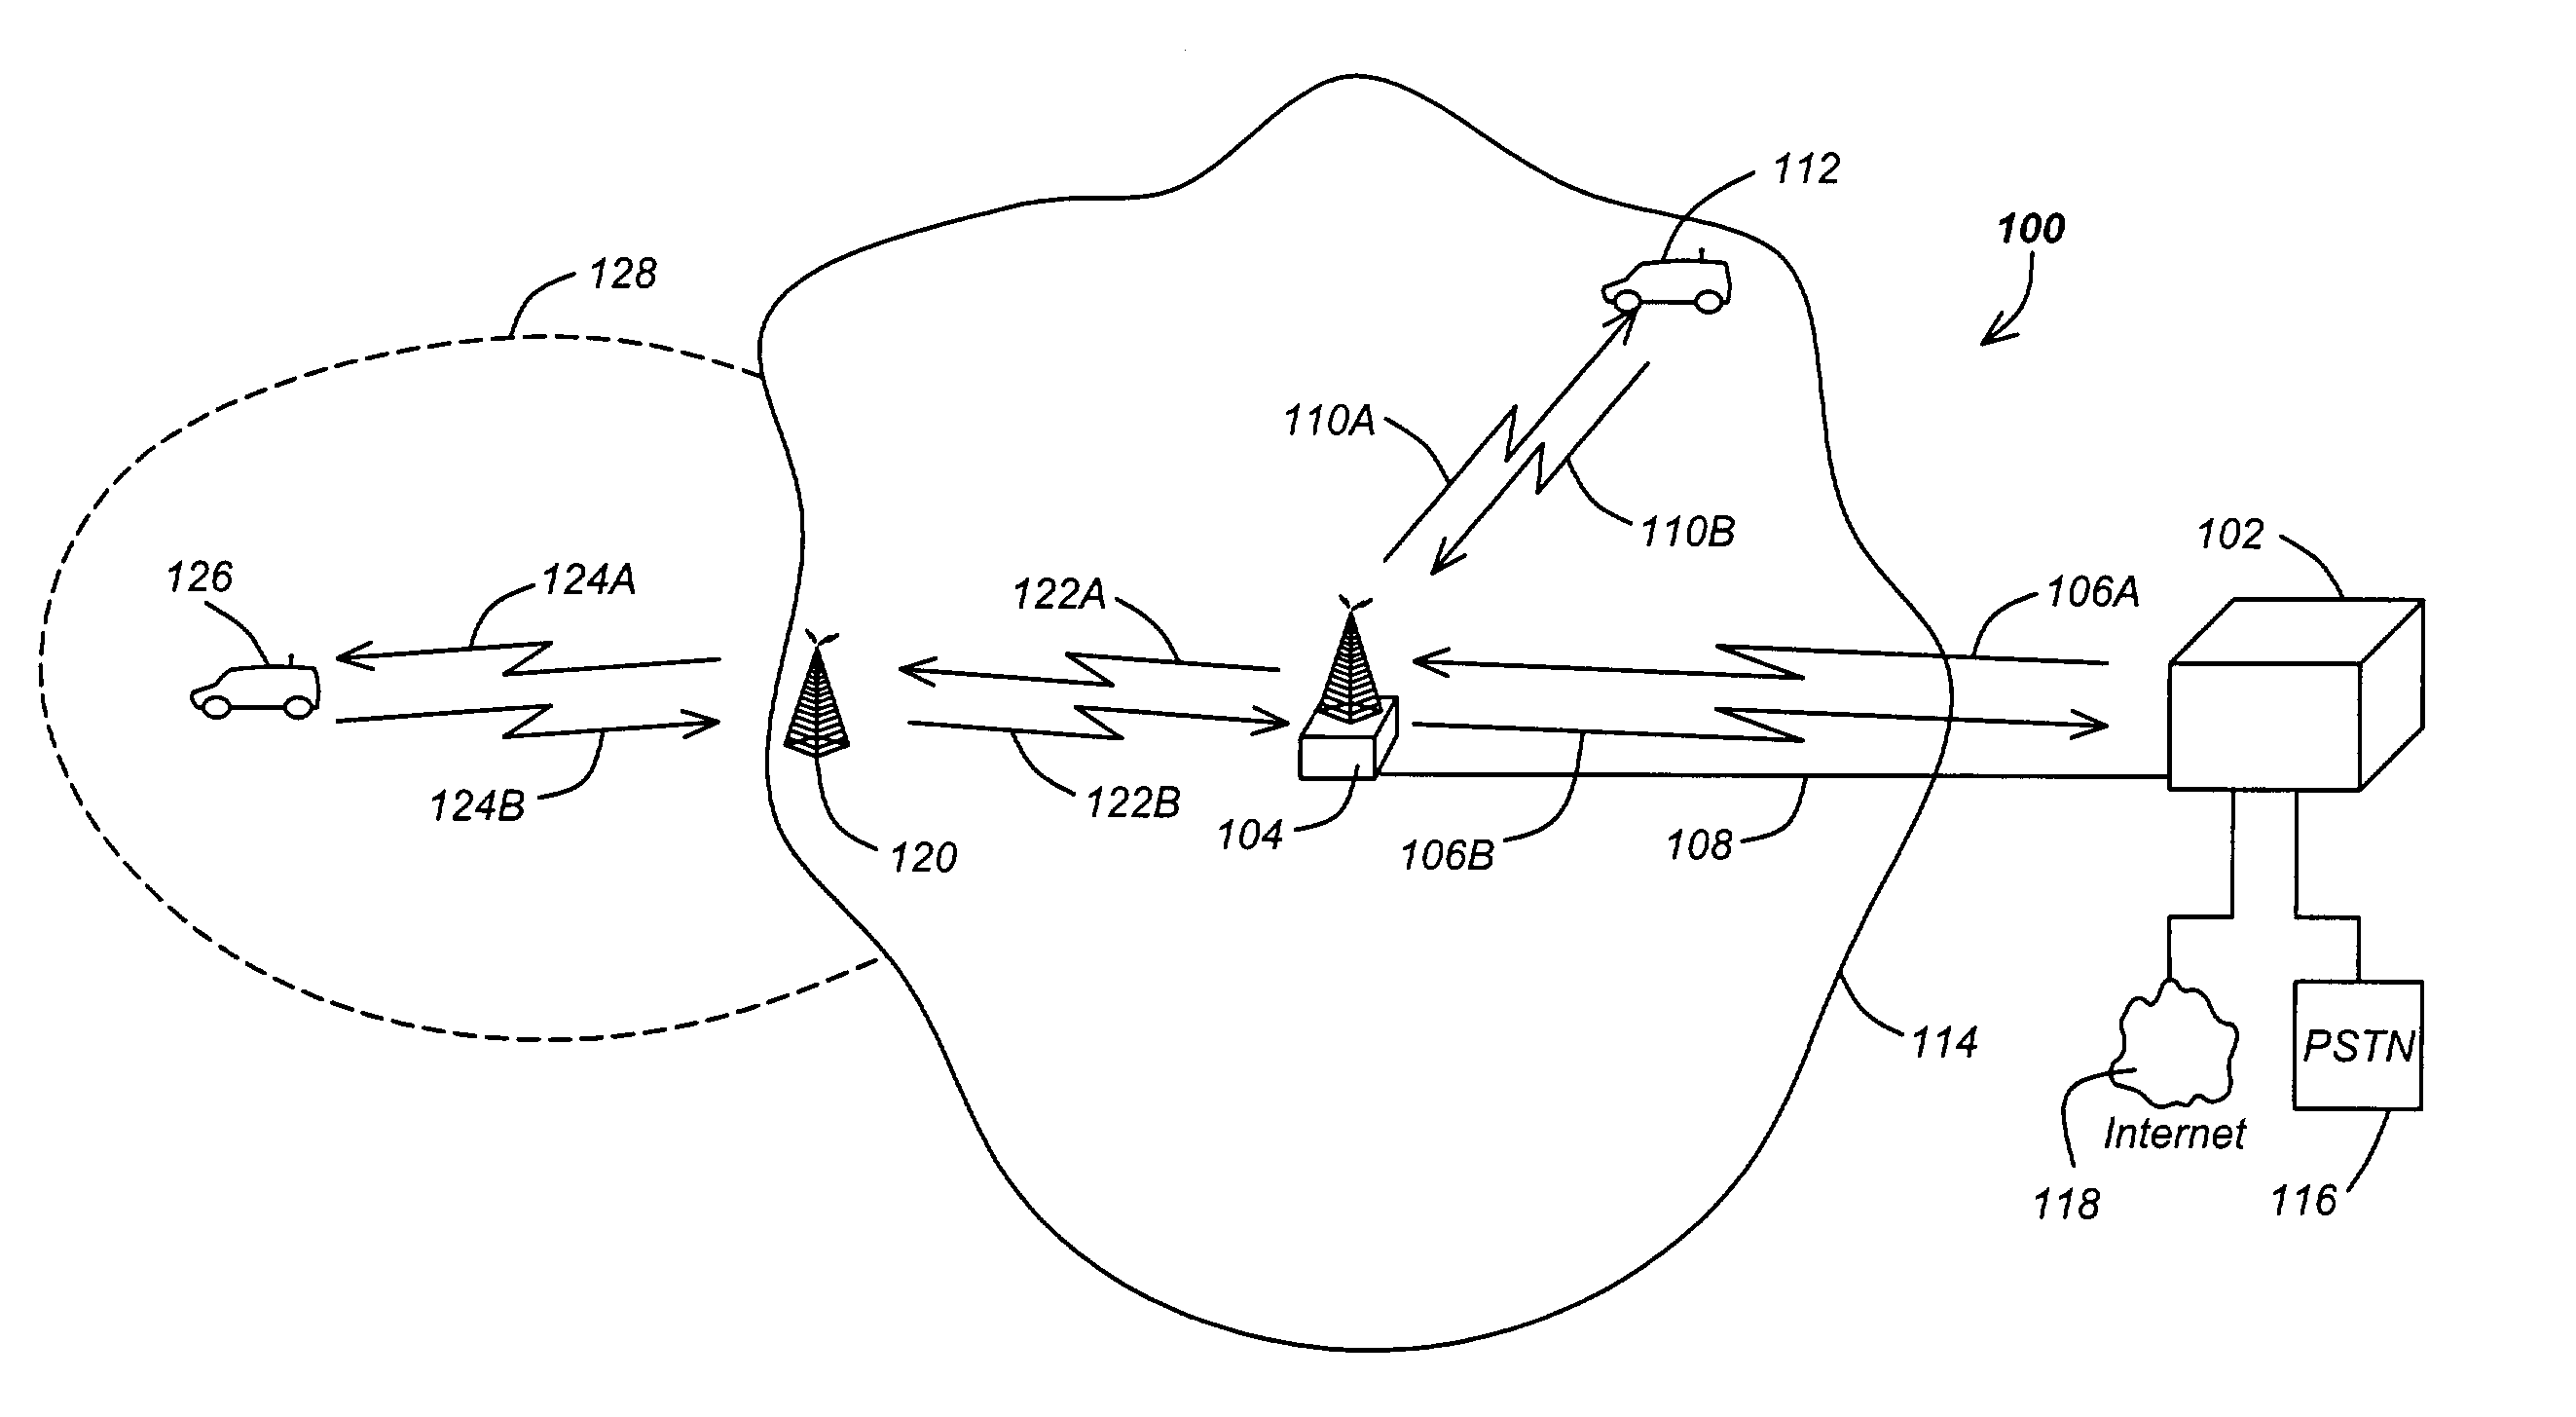 Method and system for identifying and monitoring repeater traffic in a code division multiple access system